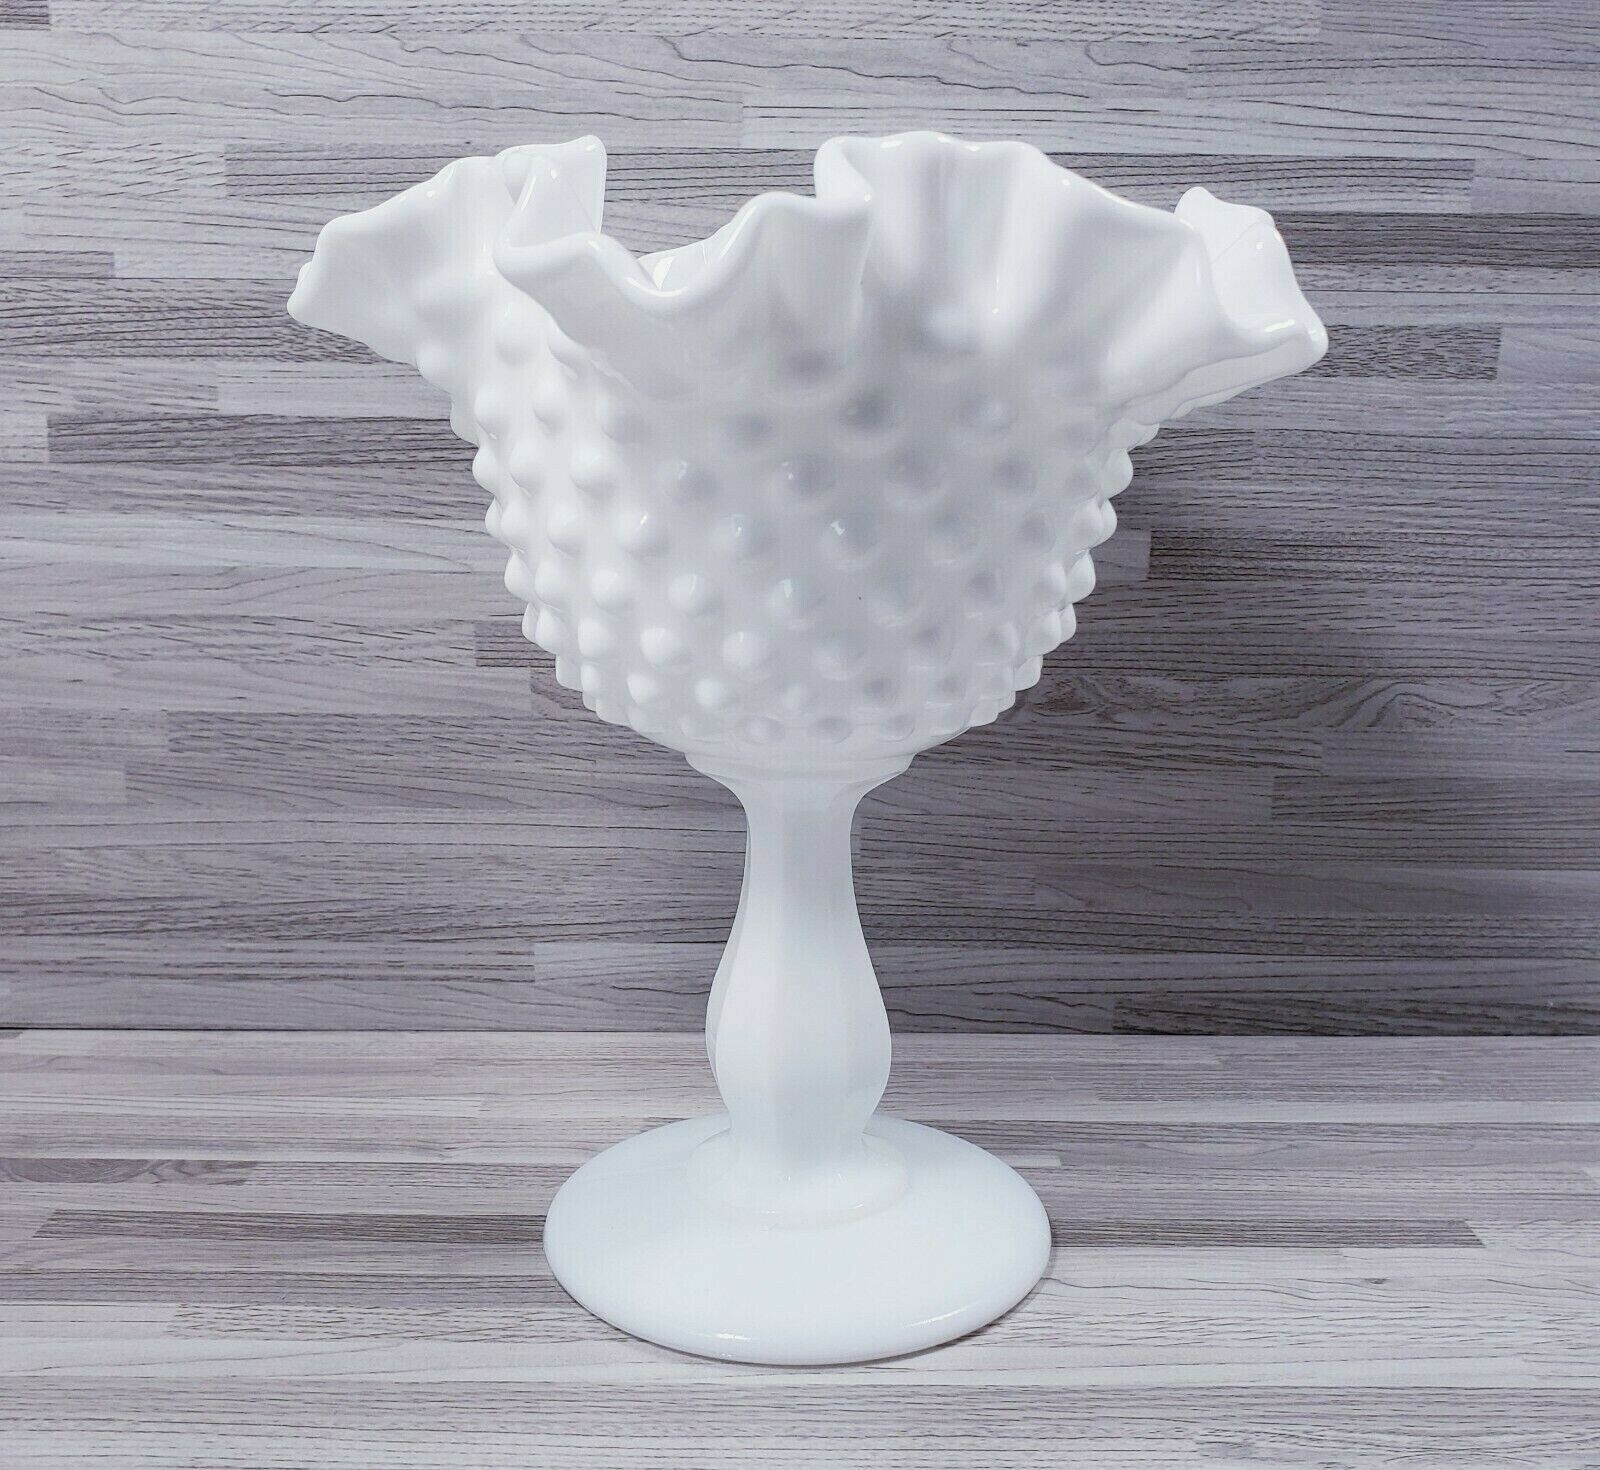 Primary image for Fenton Milk Glass Hobnail 6.25" Compote Ruffled Edge Candy Dish